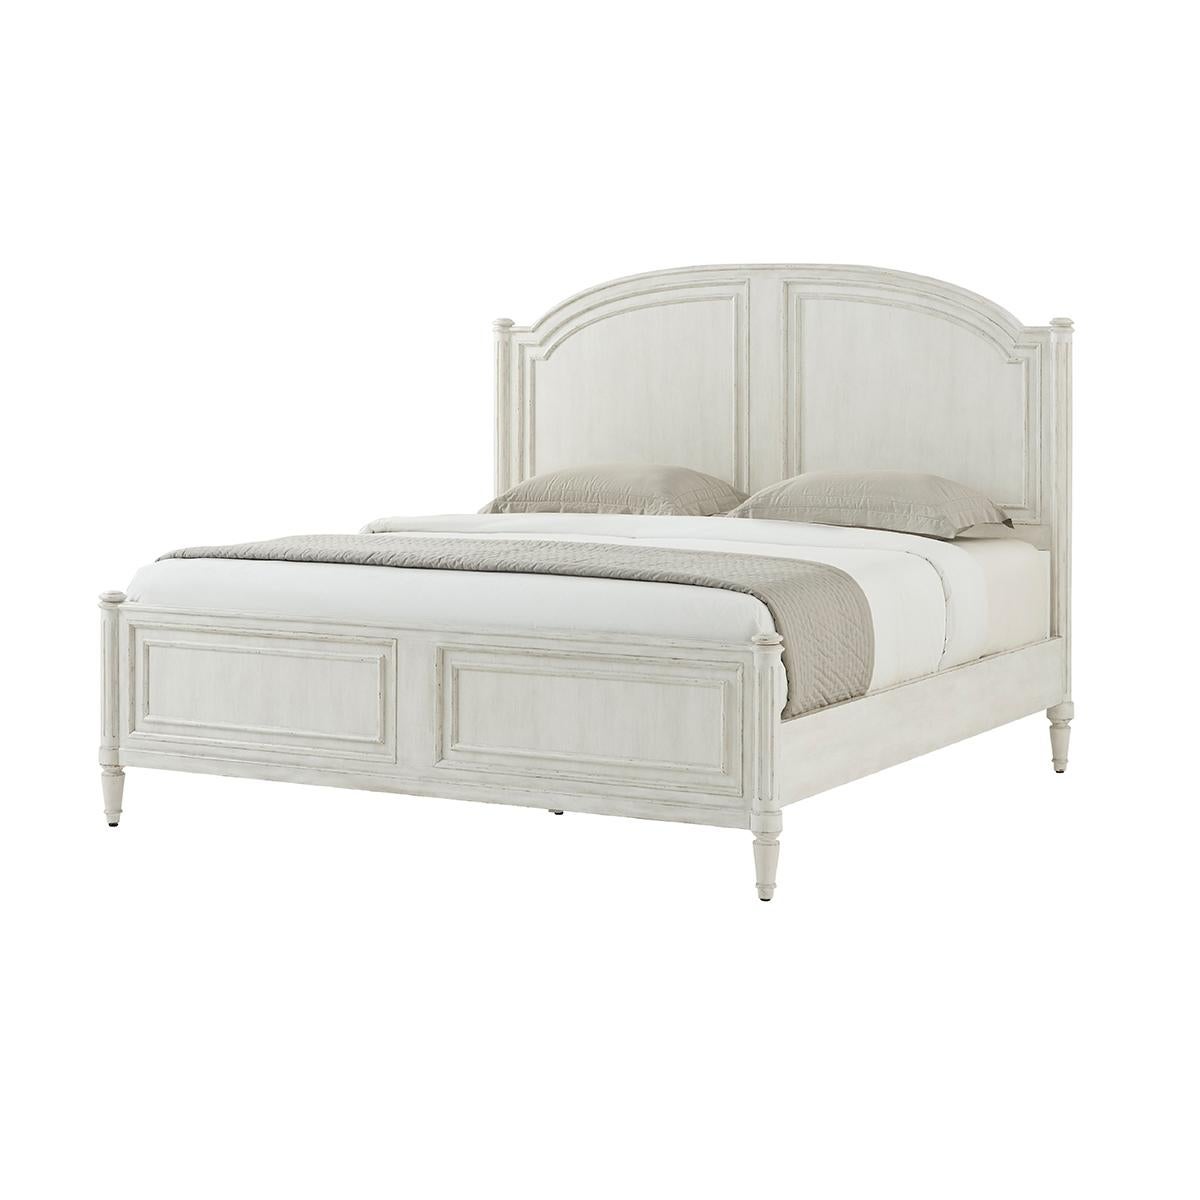 A Rustic white washed painted four post king size bed with carved arch panel headboard and paneled footboard with turned posts having ball finials and raised on fluted styles and turned and tapered feet.

Dimensions: 81.5